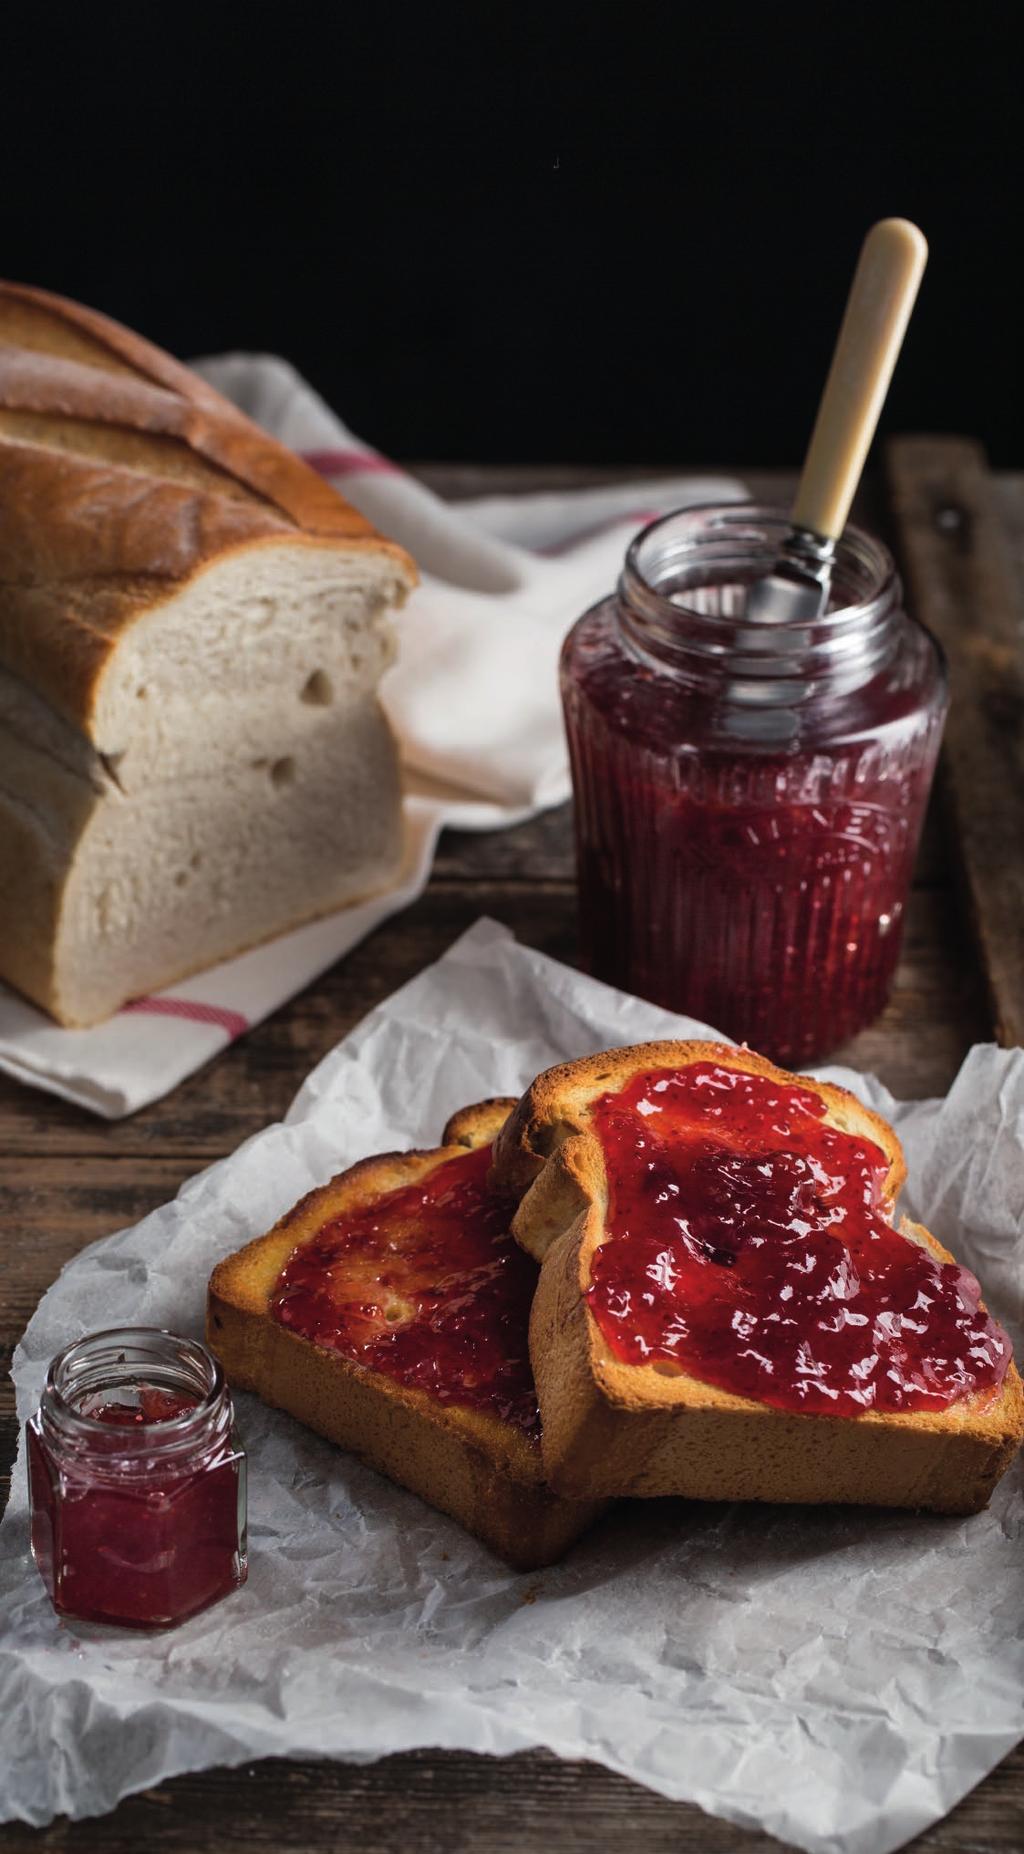 Berry Jam This delicious Berry Jam makes the perfect addition to the breakfast table. * Refer to page 10 for processing details. Refer to page 20 for altitude guide.